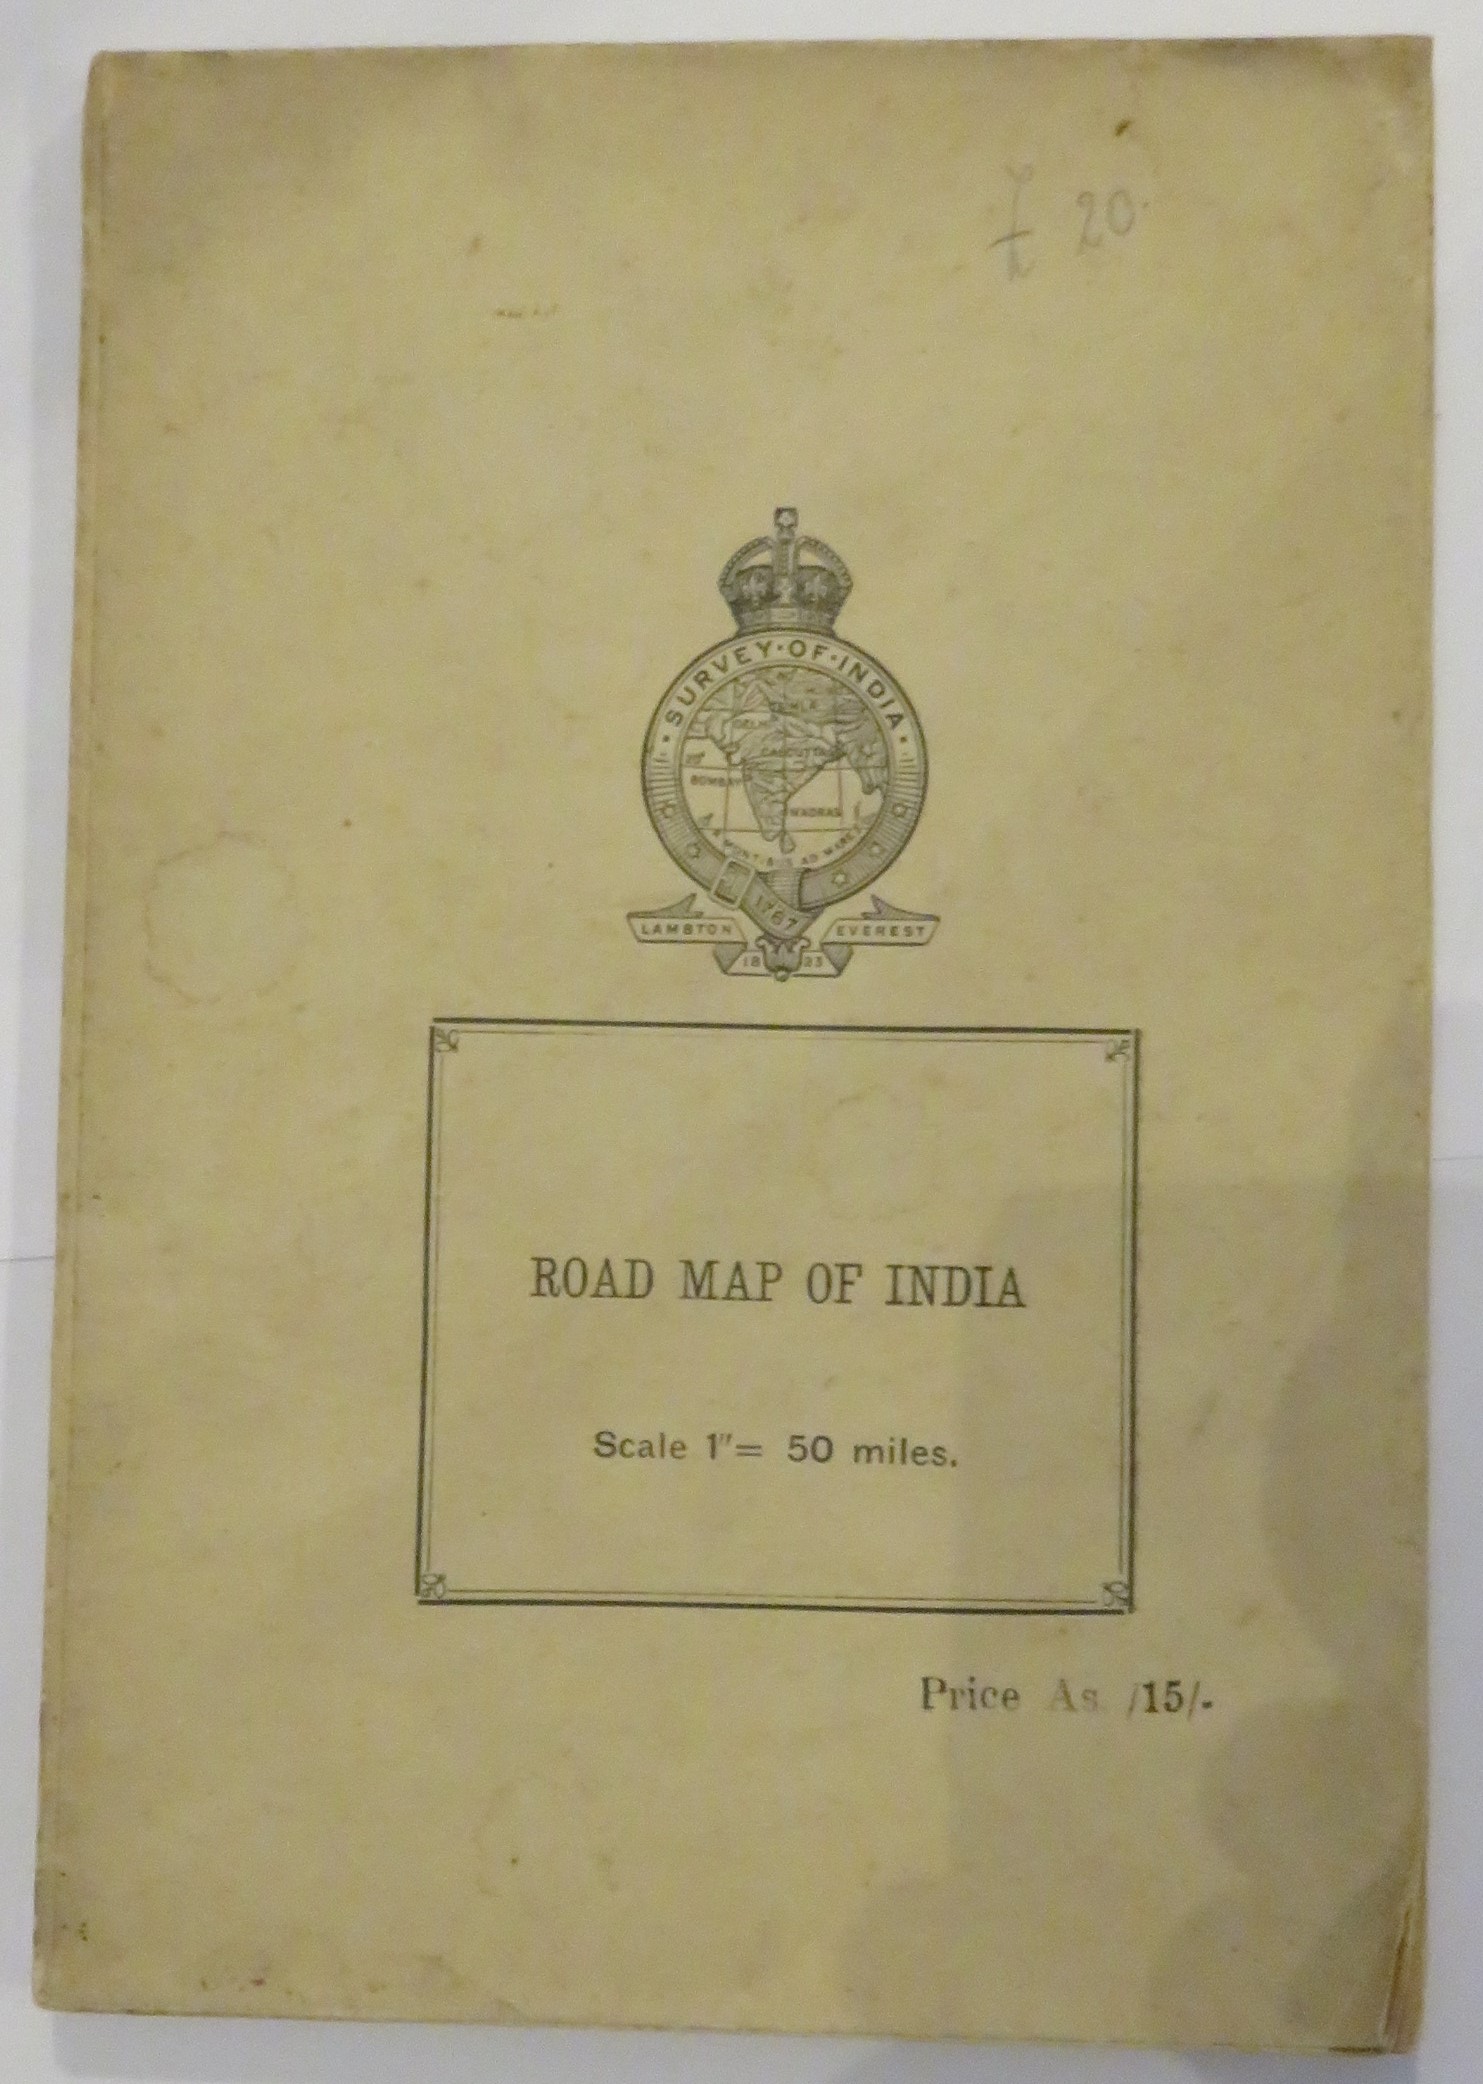 Road Map of India Scale 1:50 